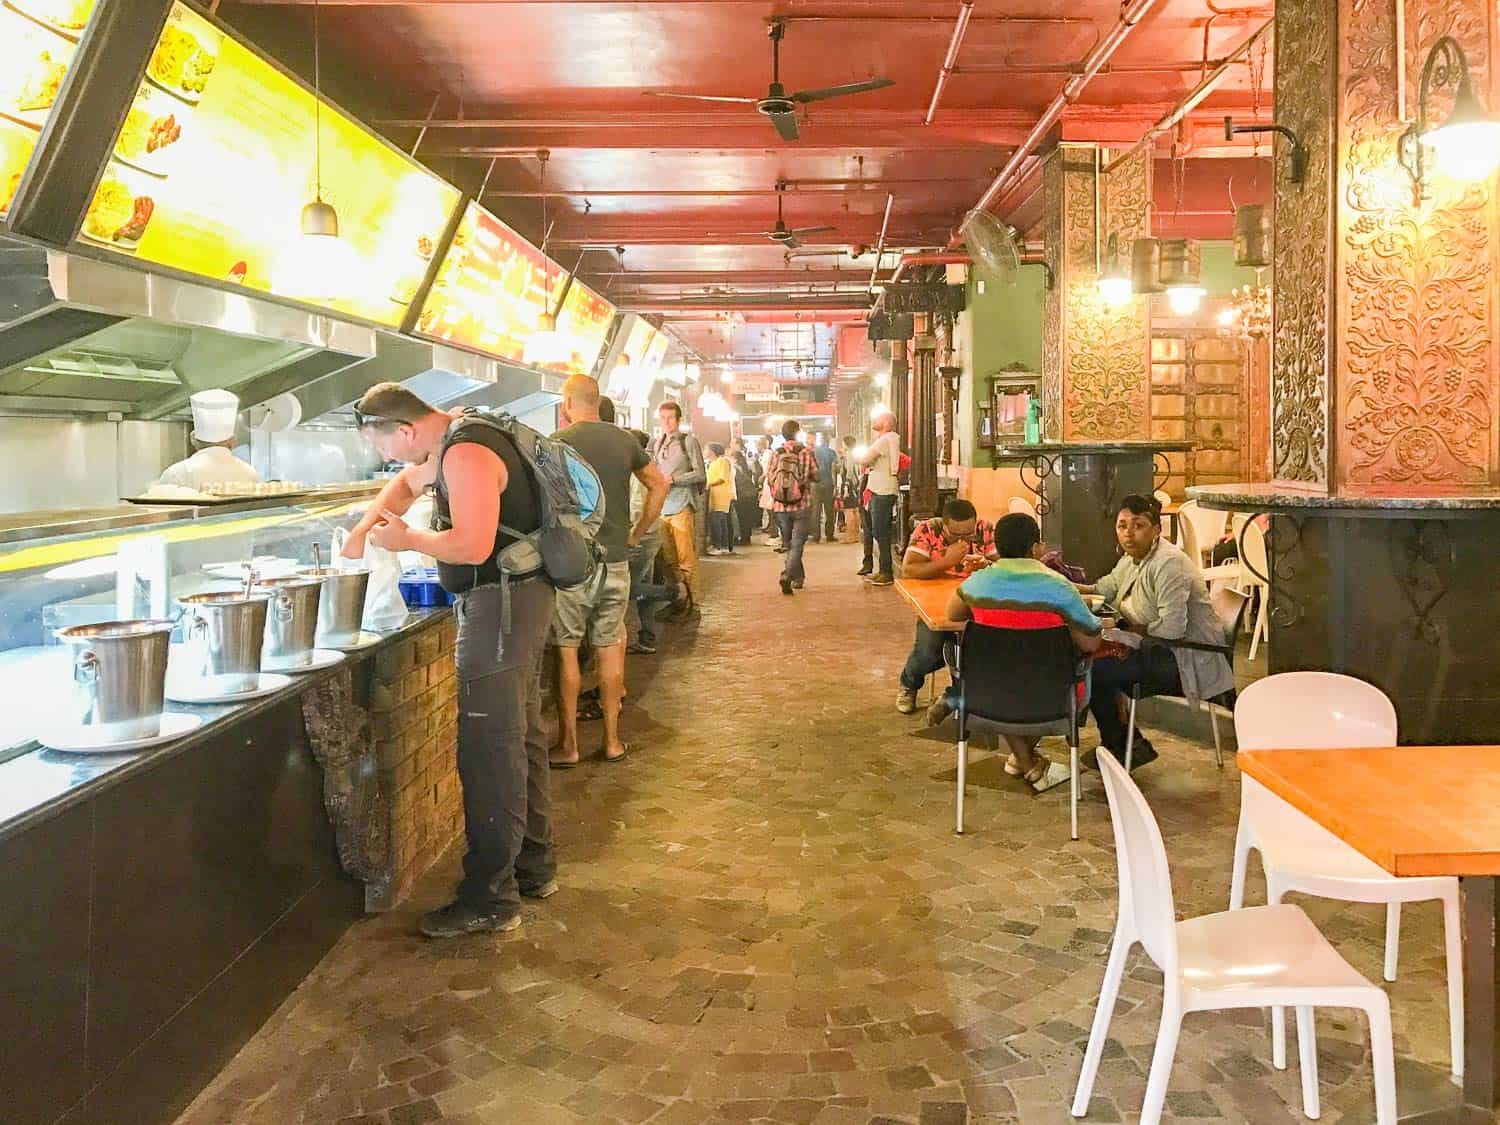 Eastern Food Bazaar is a good place for cheap vegetarian Indian food in Cape Town